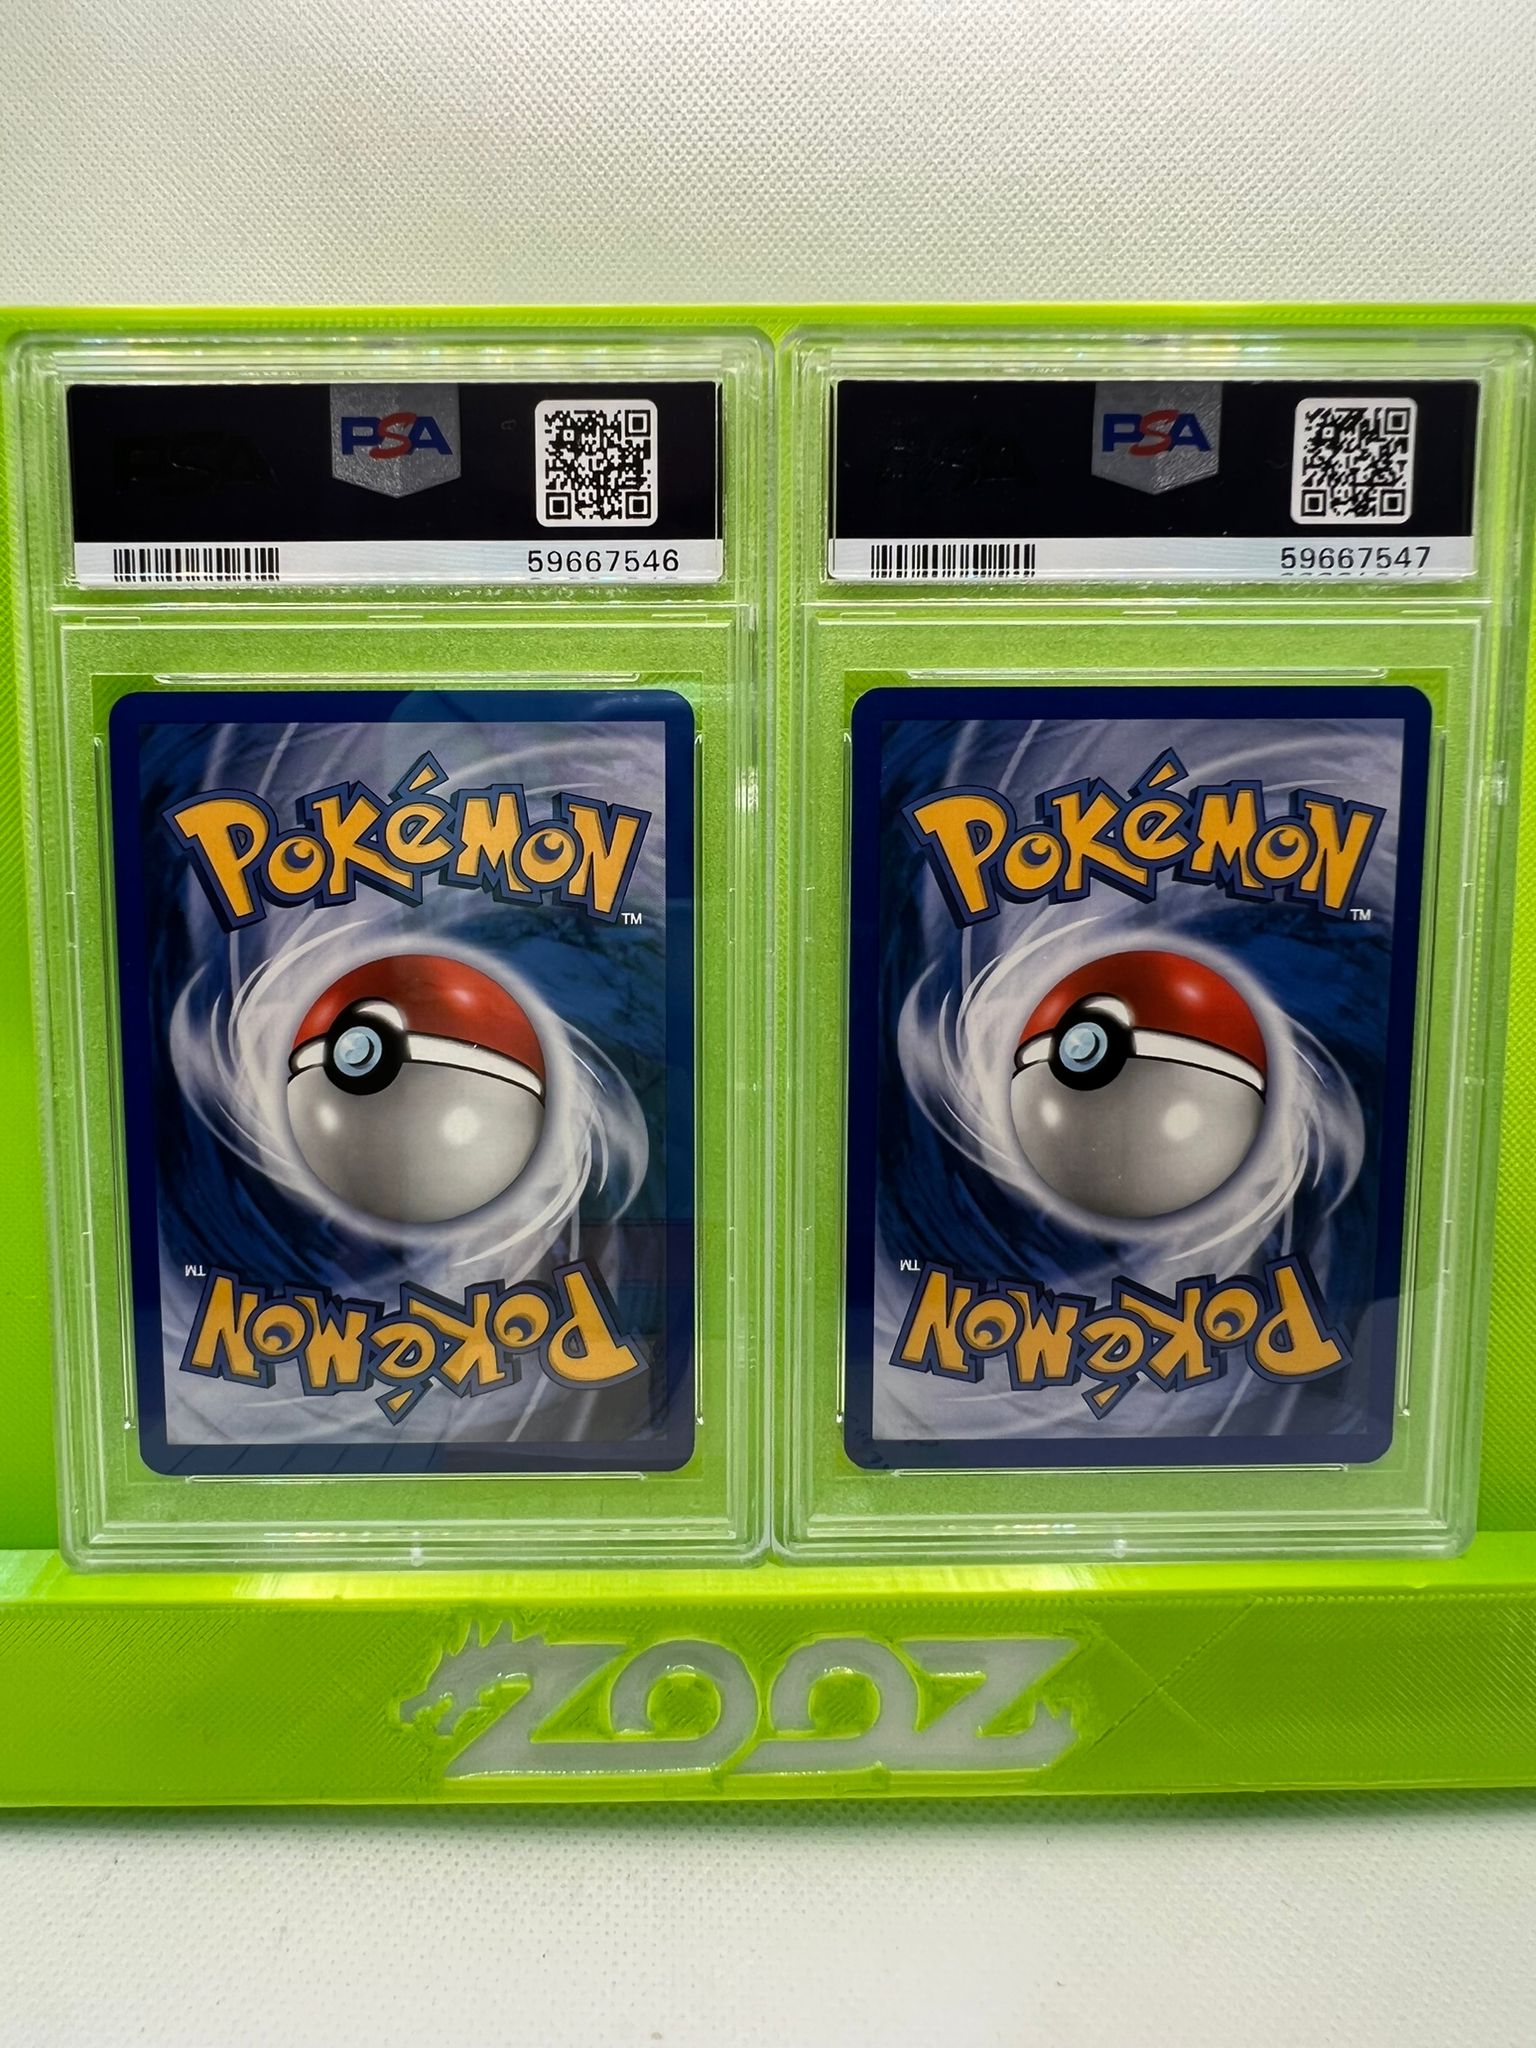 rangle FALSK Loaded PSA 10 Pokemon EX Exeggcute #33 Fire Red & Leaf Green Non Holo – zooz  collectibles llc